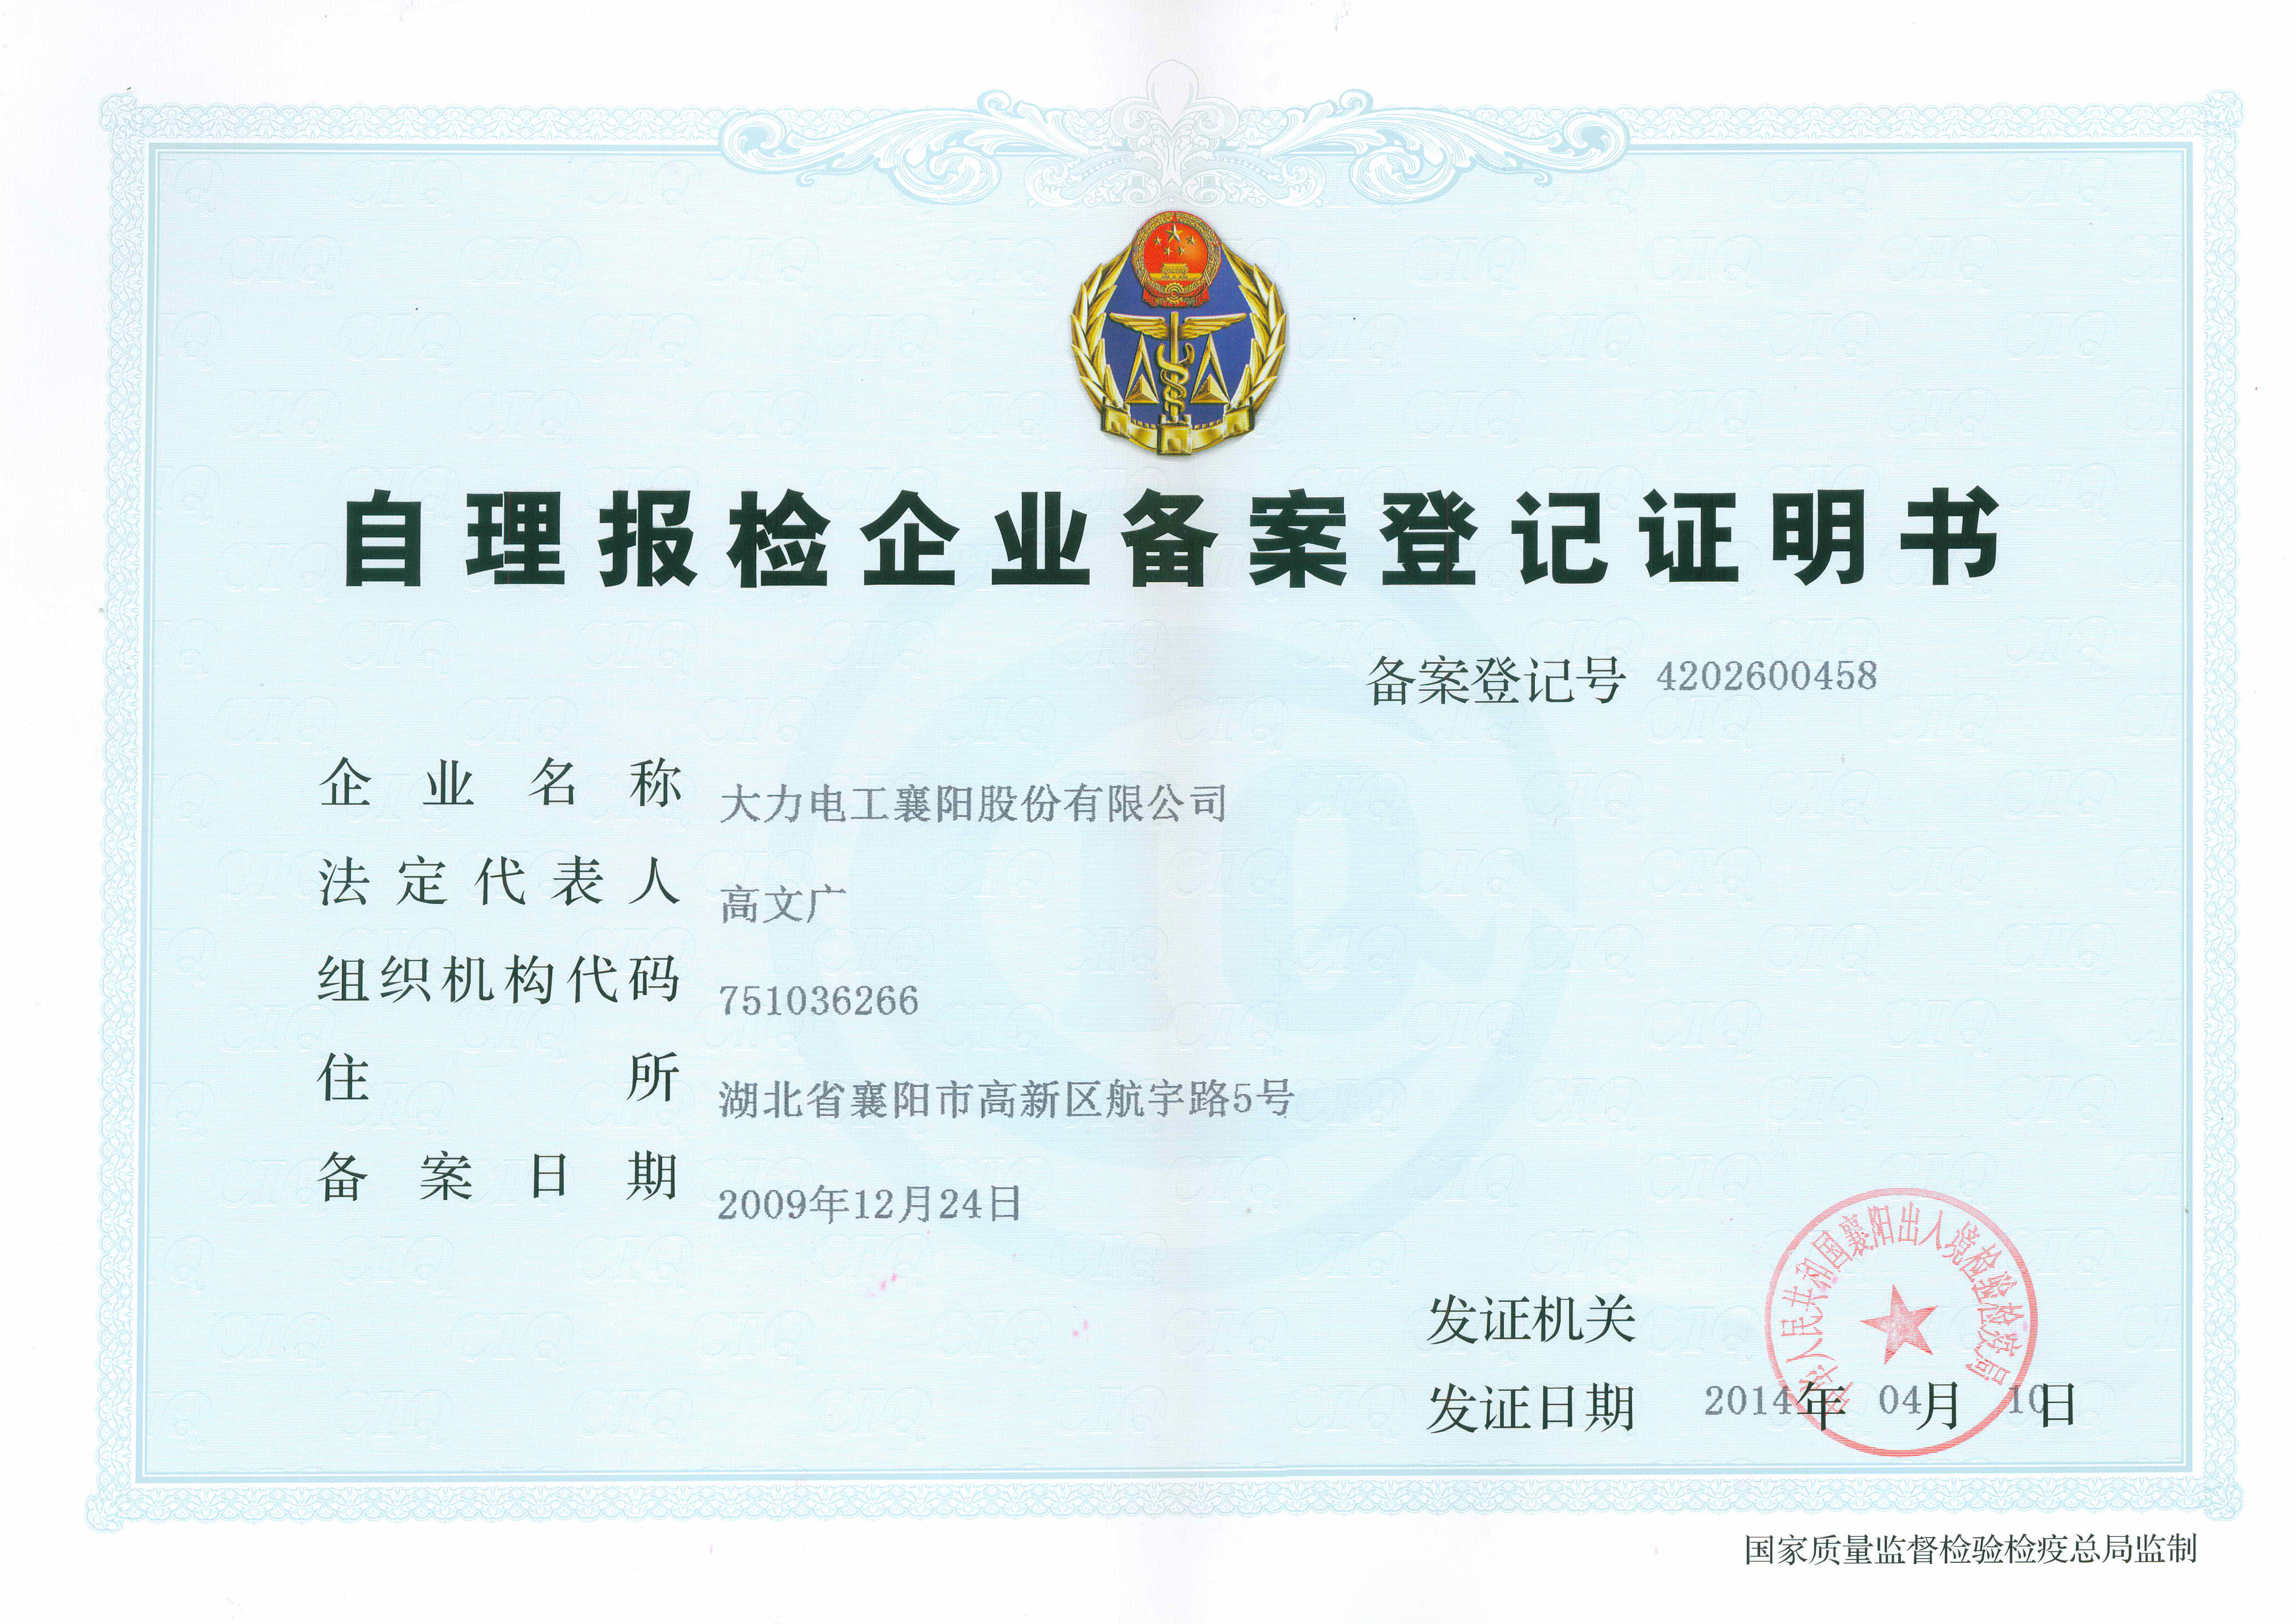 Certificate of independent customs inspection company